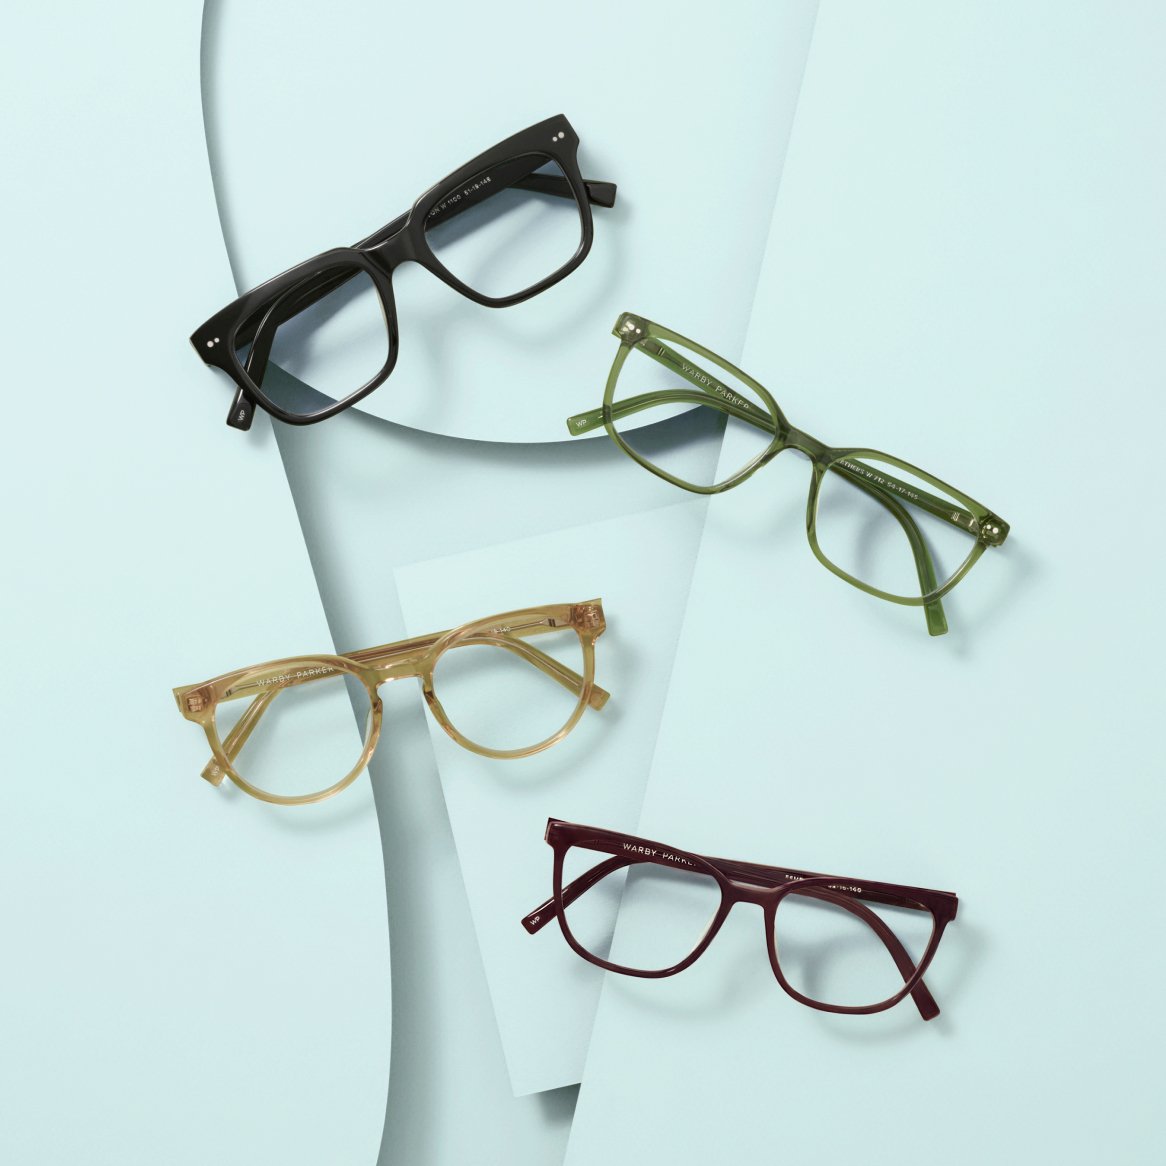 Four pairs of eyeglasses in different colors